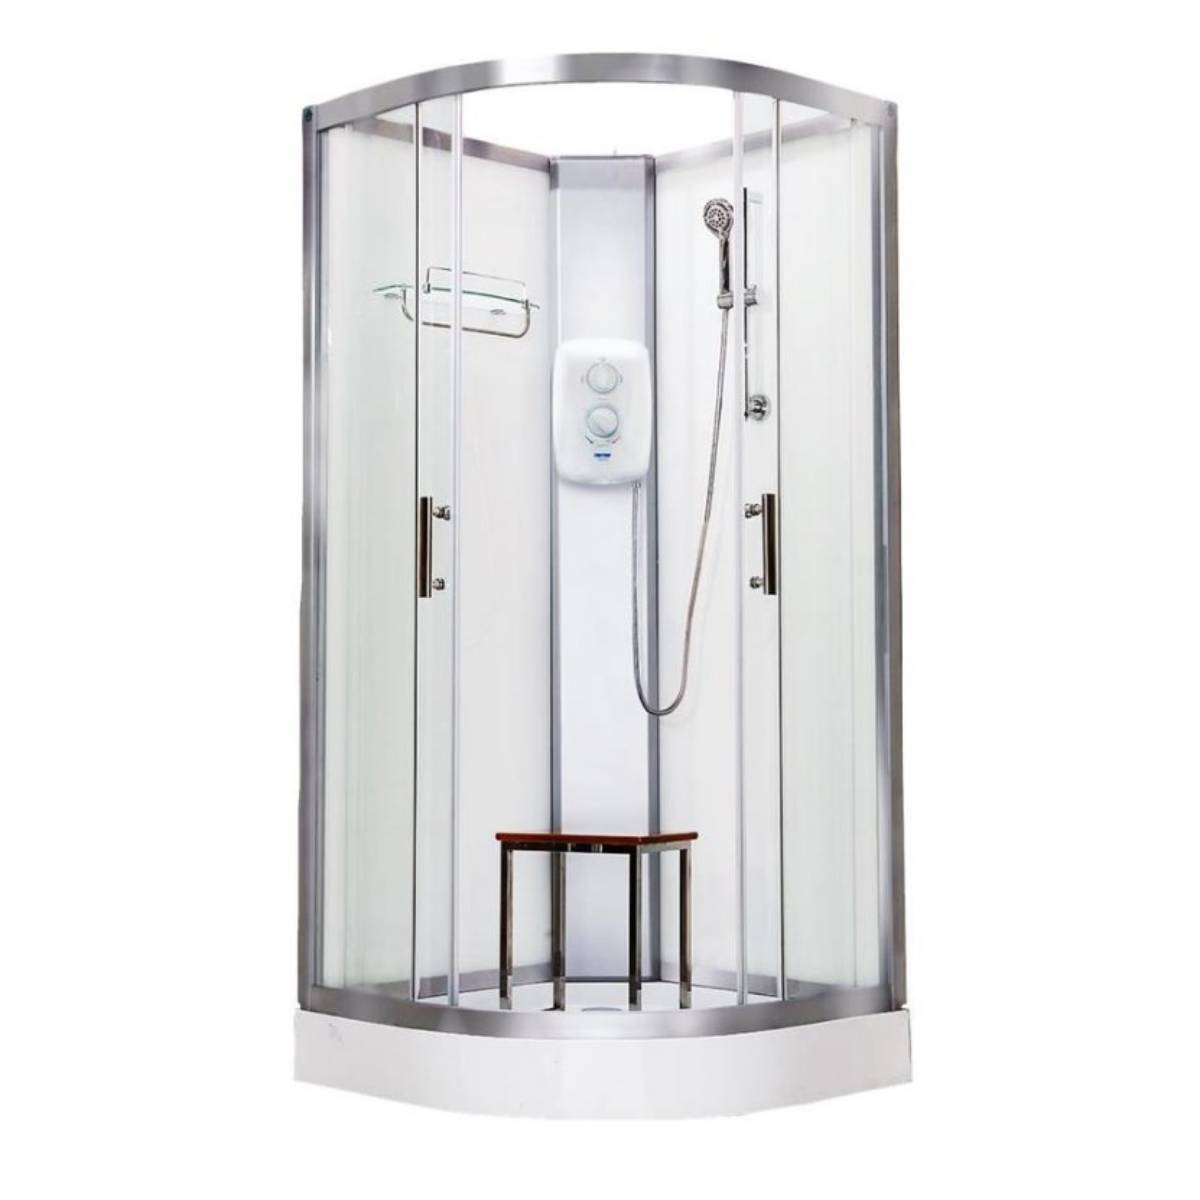 Vidalux Pure Electric 1000mm Shower Cabin White - Standard 9.5KW (11627)